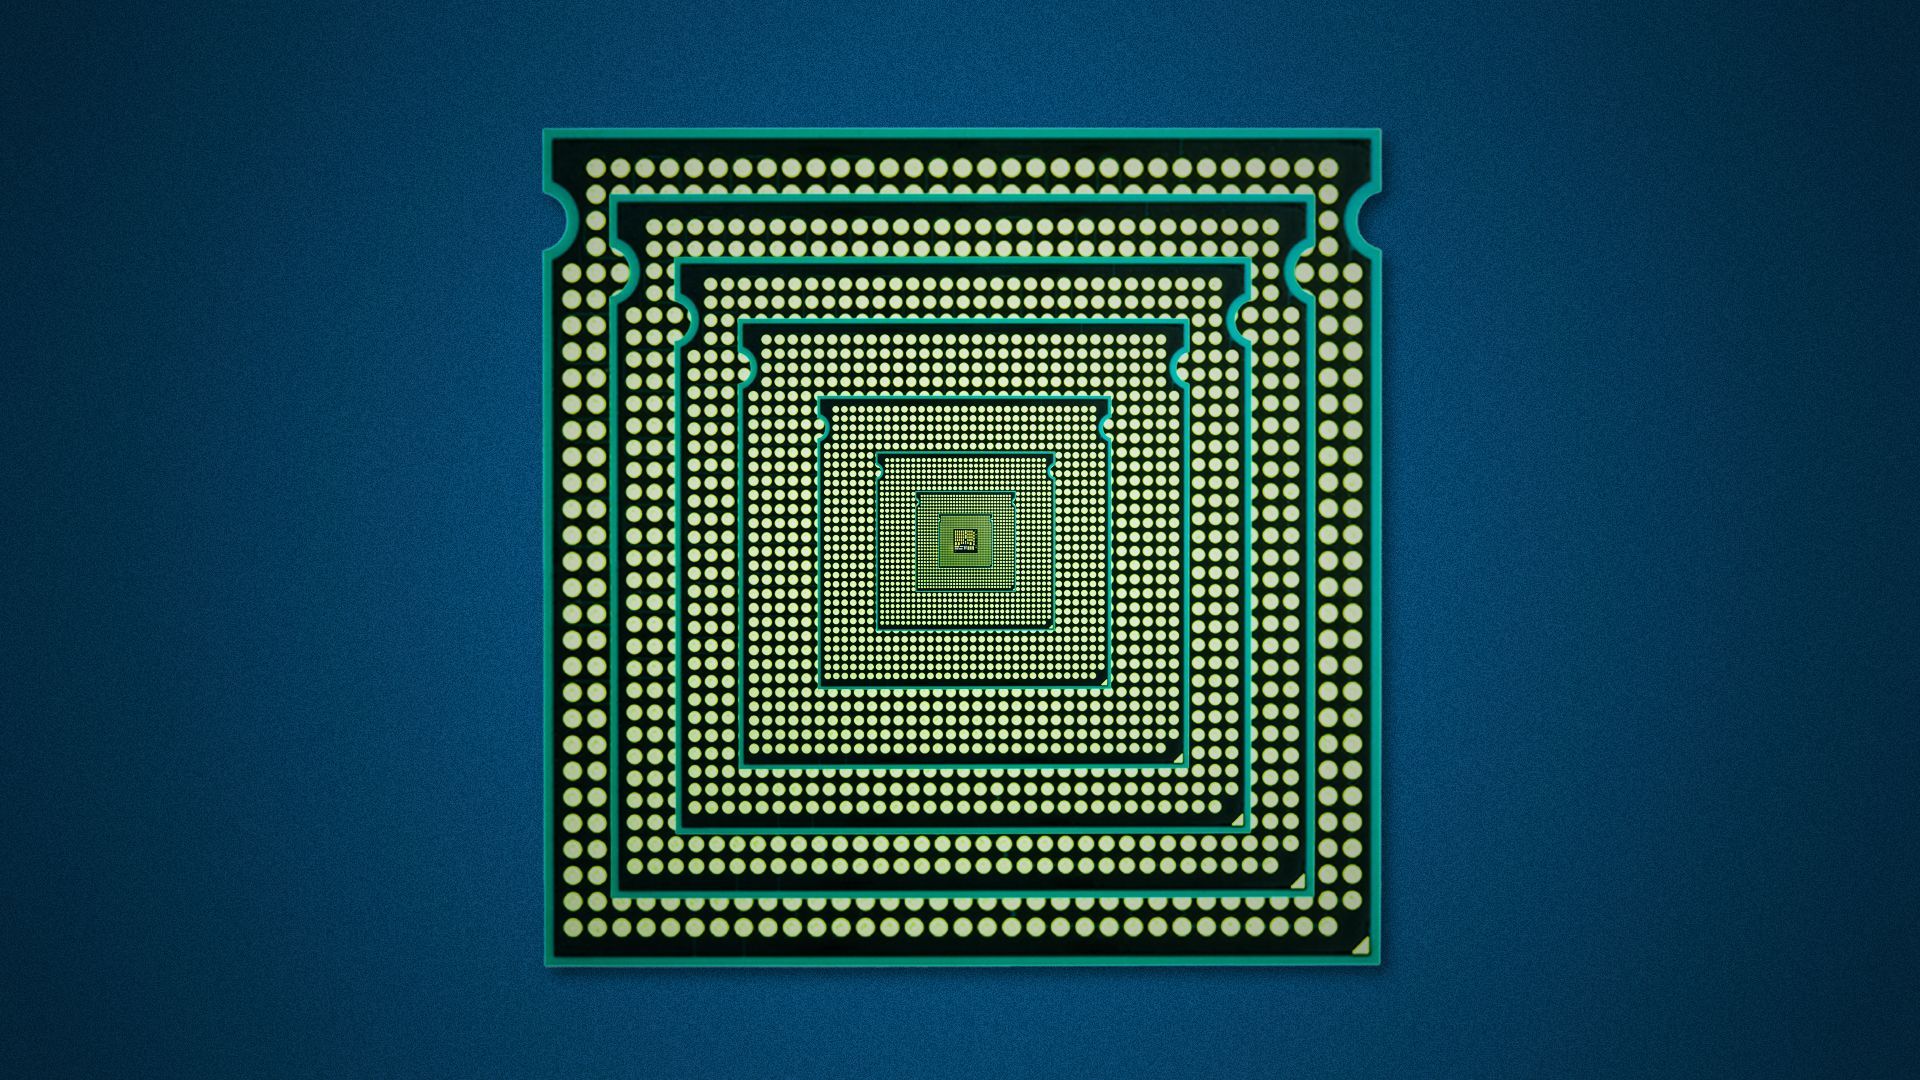 Illustration of an infinite, recursive tunnel of semiconductor chips.